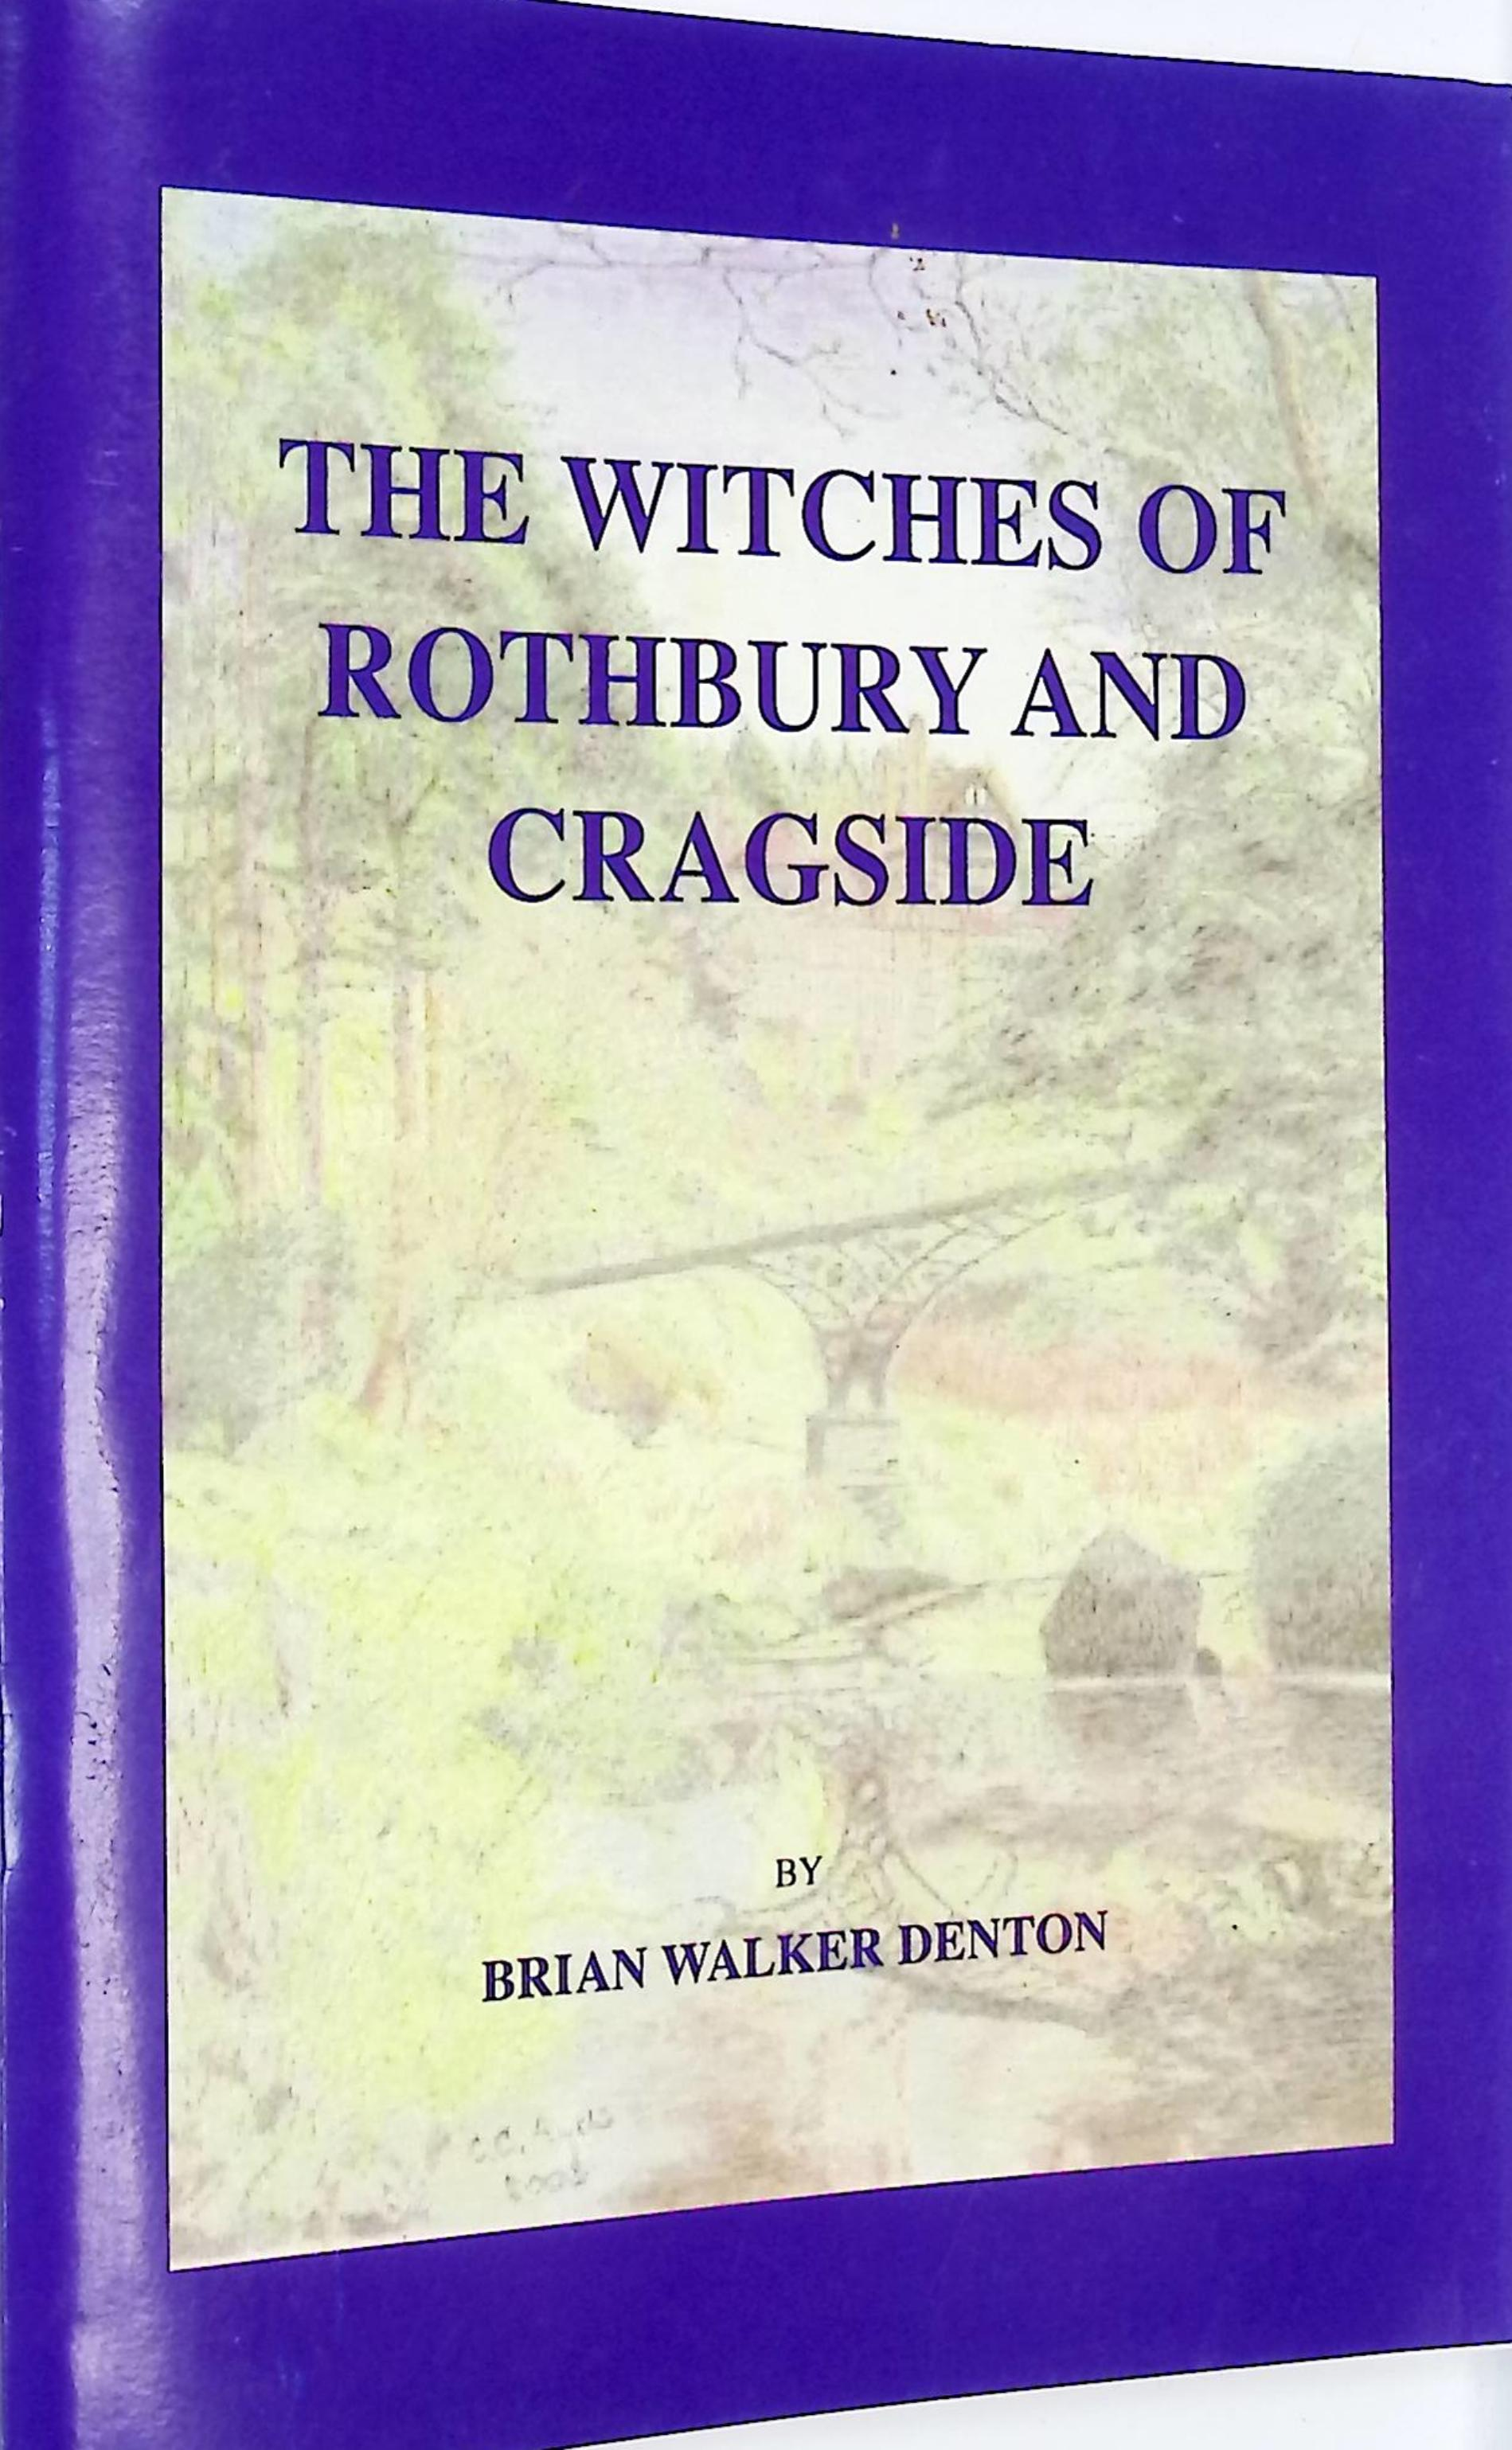 The Witches of Rothbury and Cragside